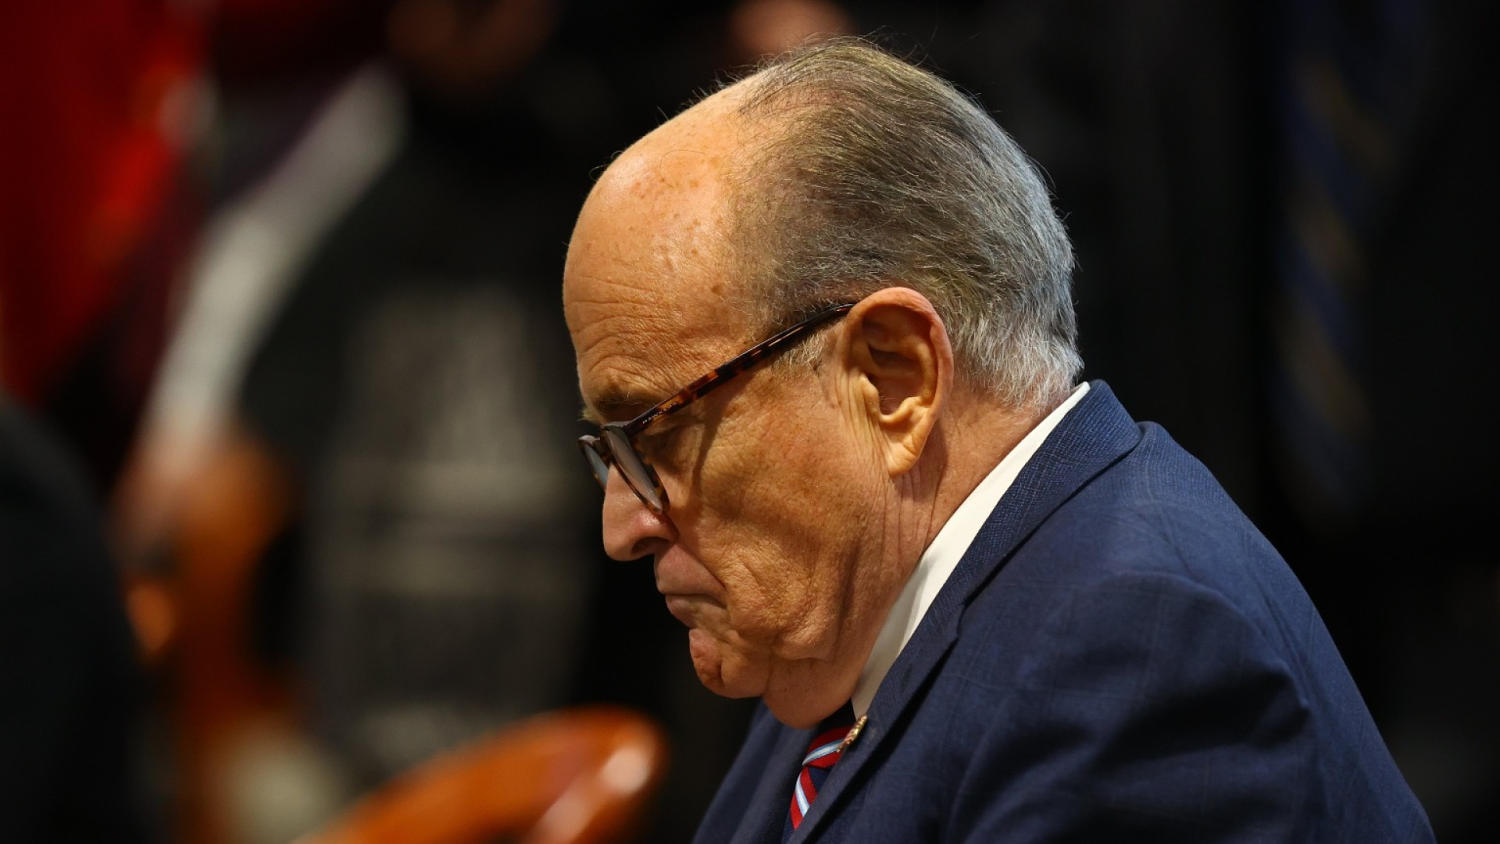 Rudy Giuliani disbarred in New York for spreading Trump's 2020 election lies